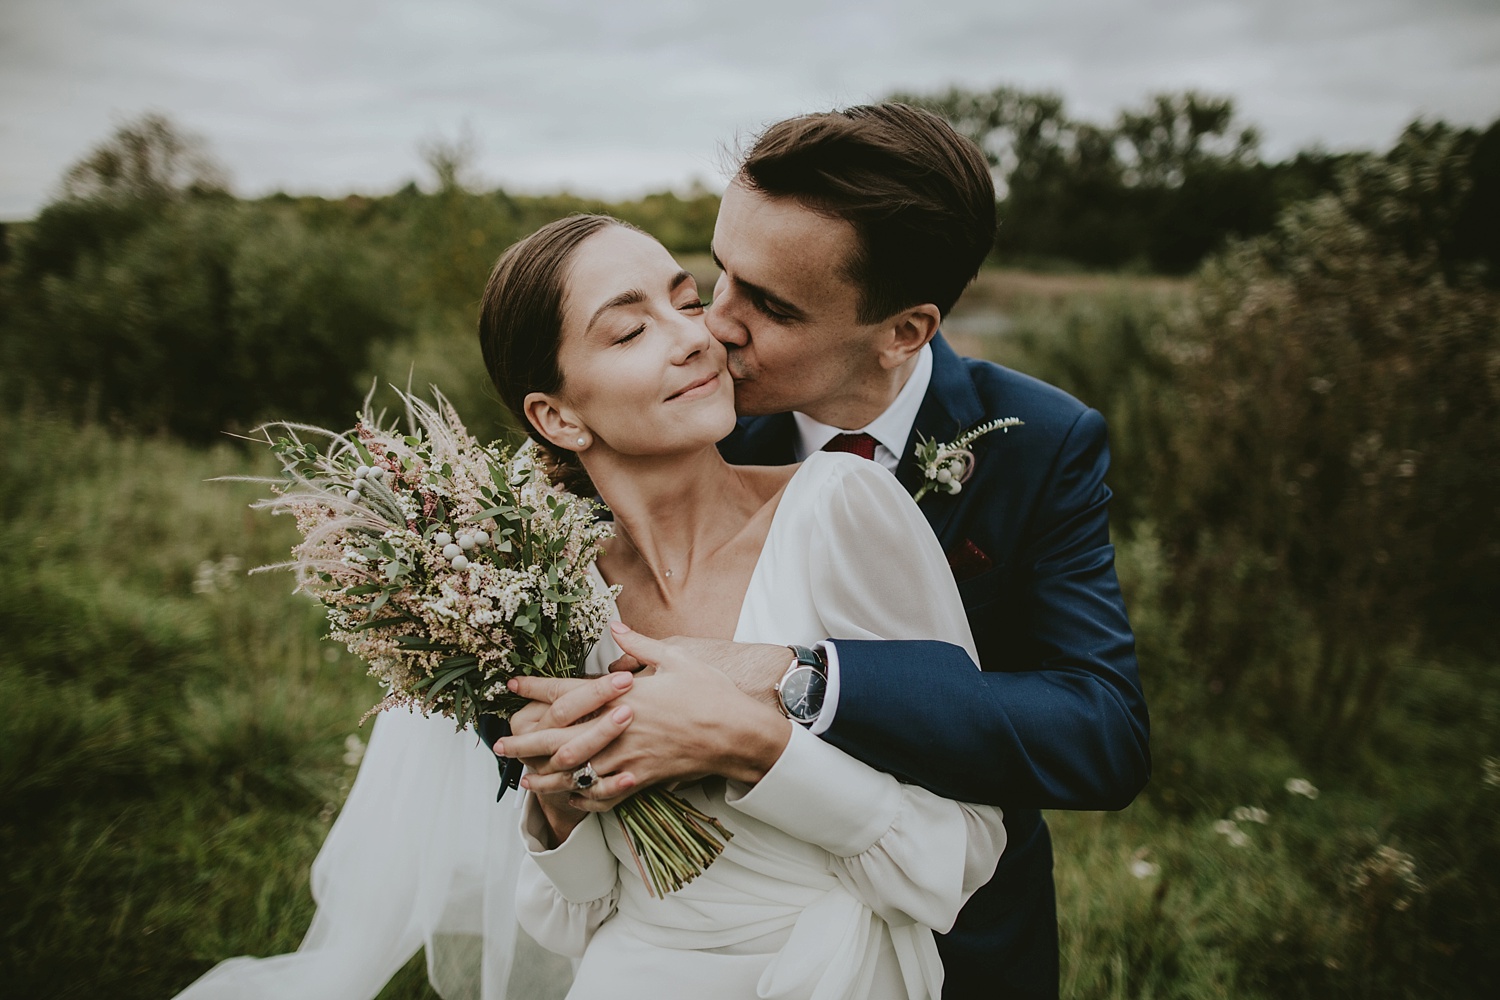 autumn wedding in lithuania m g